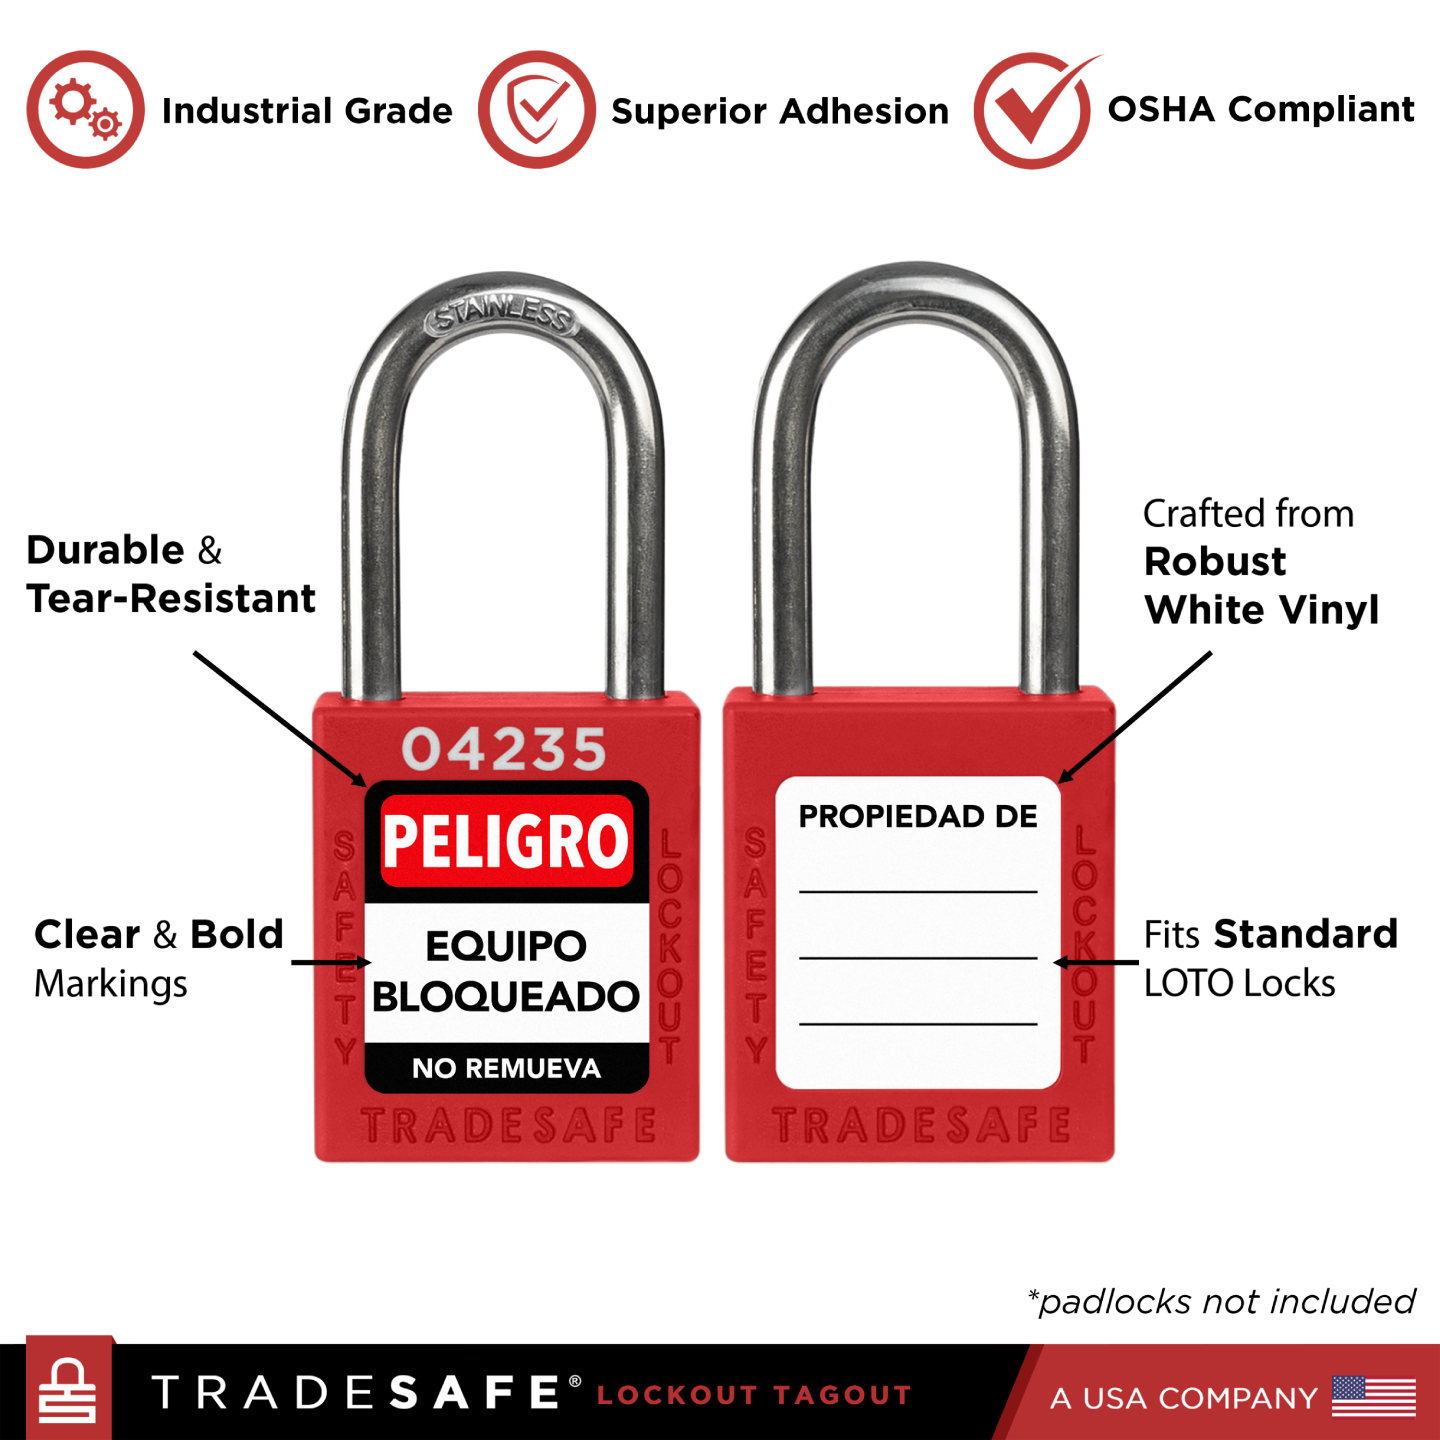 infographic: features of lockout tagout lock labels